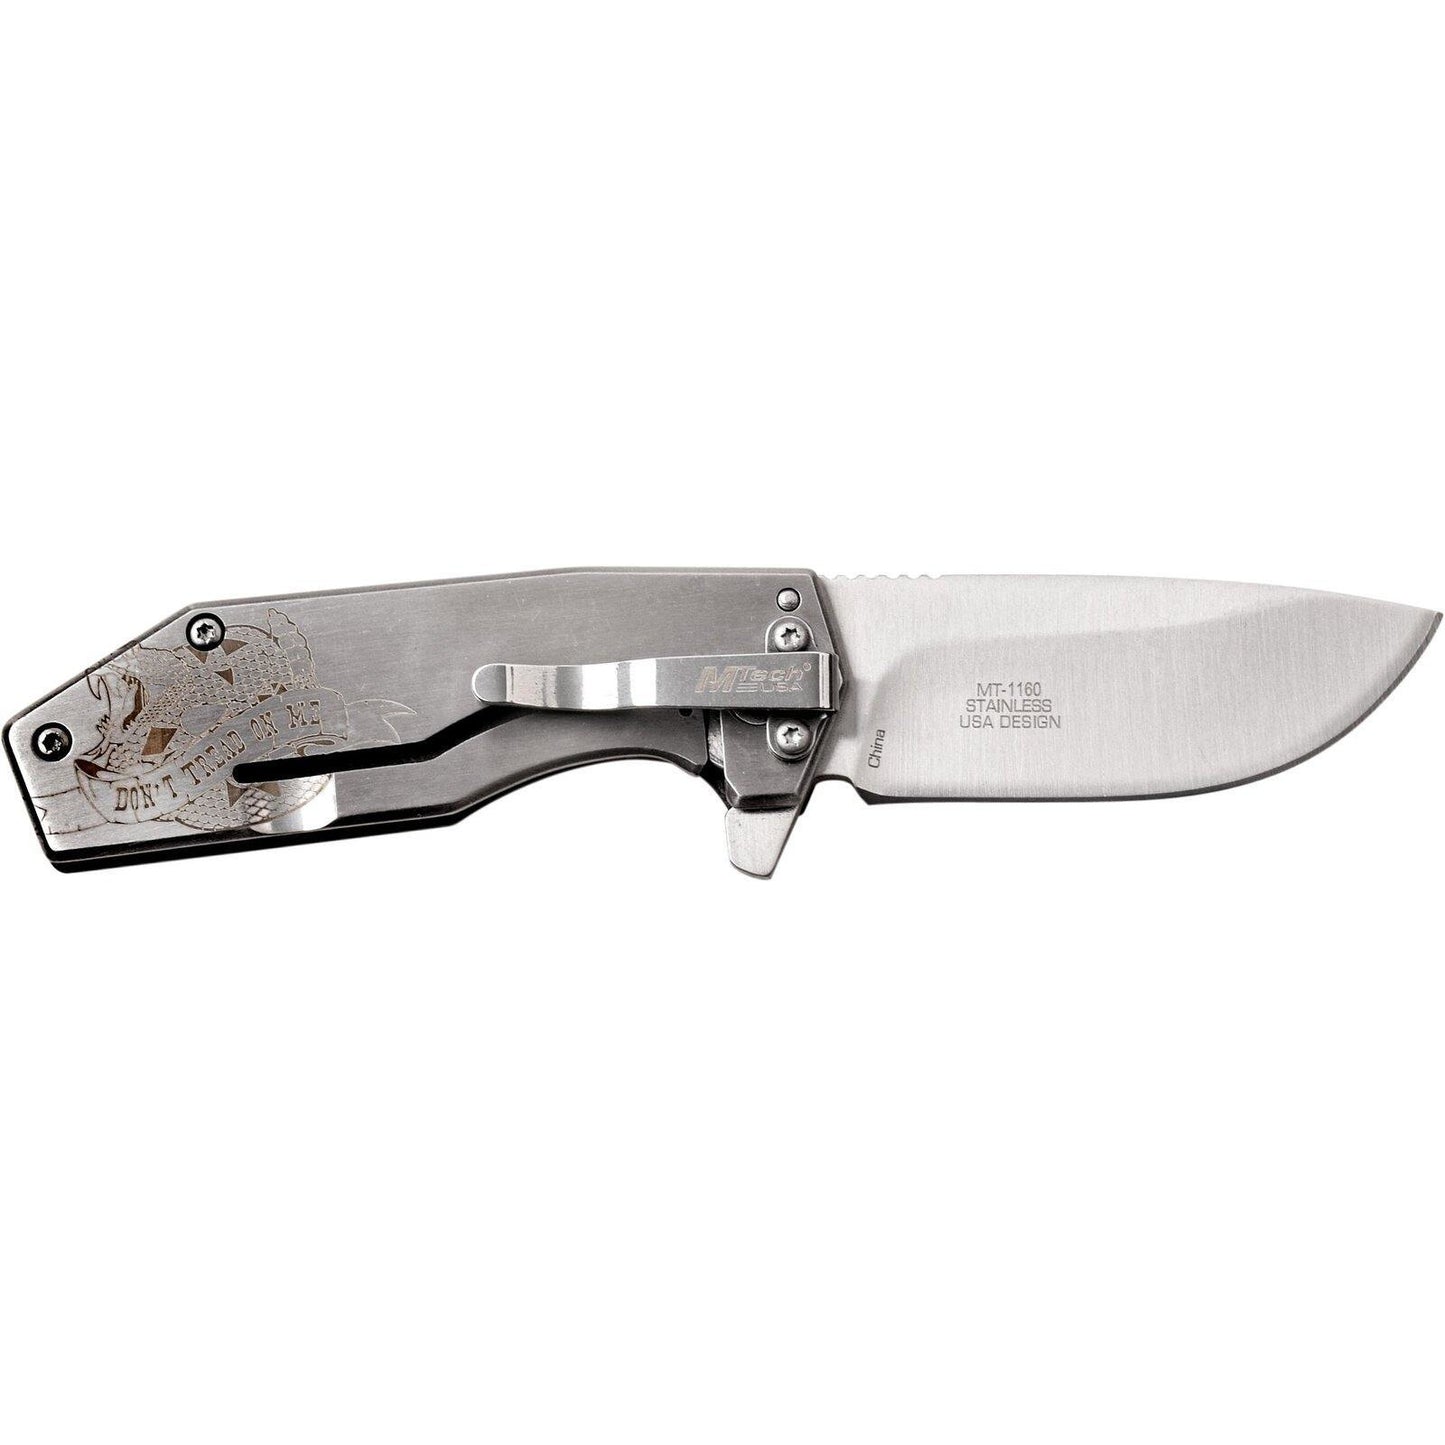 Mtech Drop Point Fine Edge Blade Folding Knife - 6 Inches Overall G10 Handle #mt-1160Ss - Xhunter New Zealand